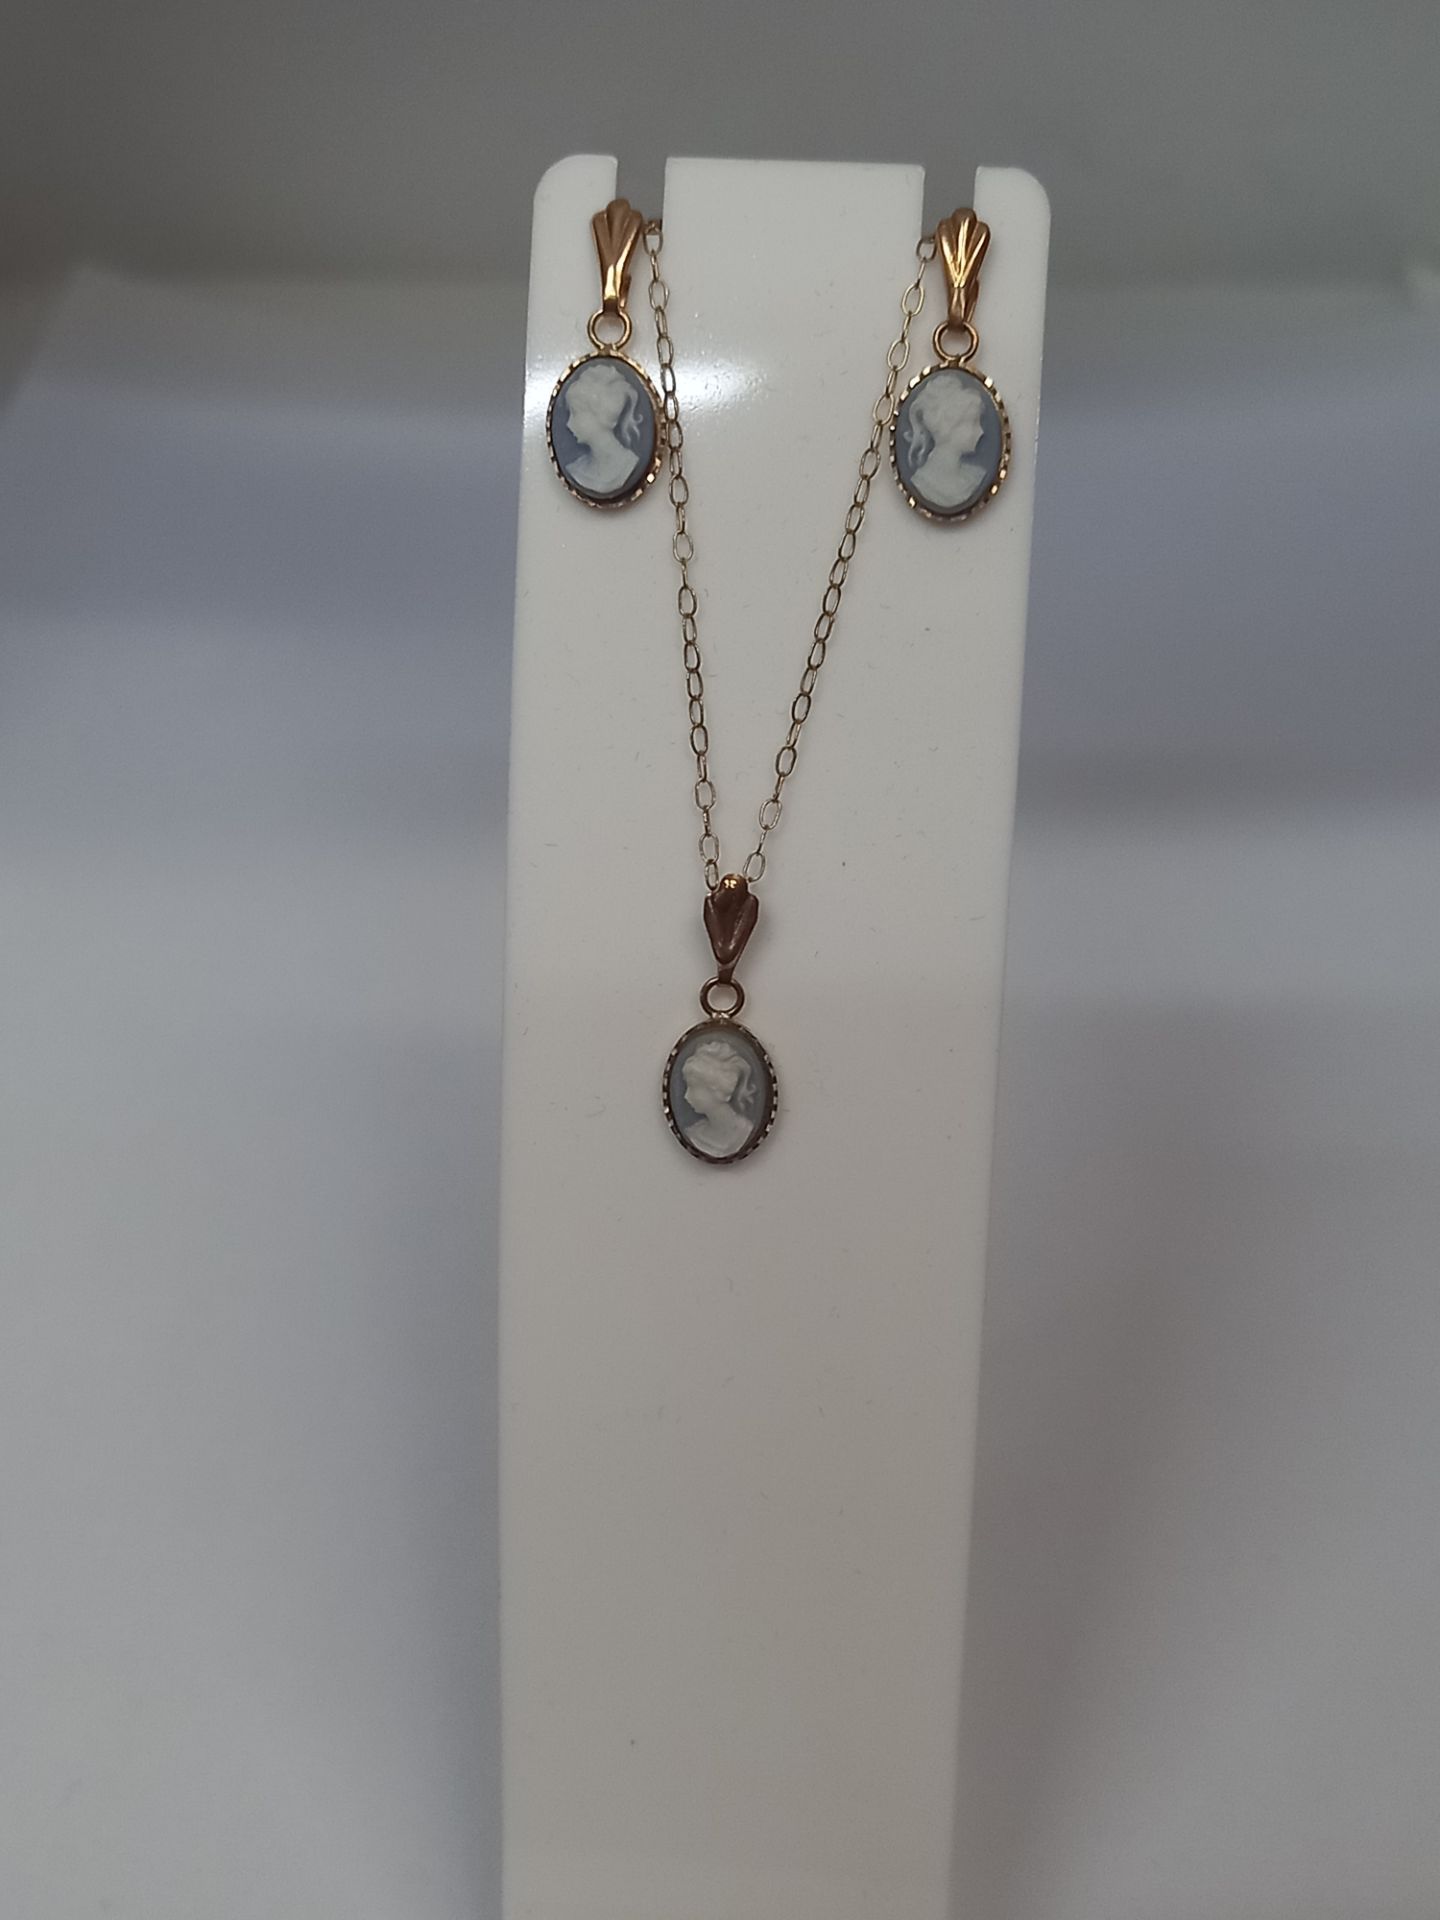 DELICATE 9CT GOLD NECKLACE & EARRING SET - Image 2 of 5